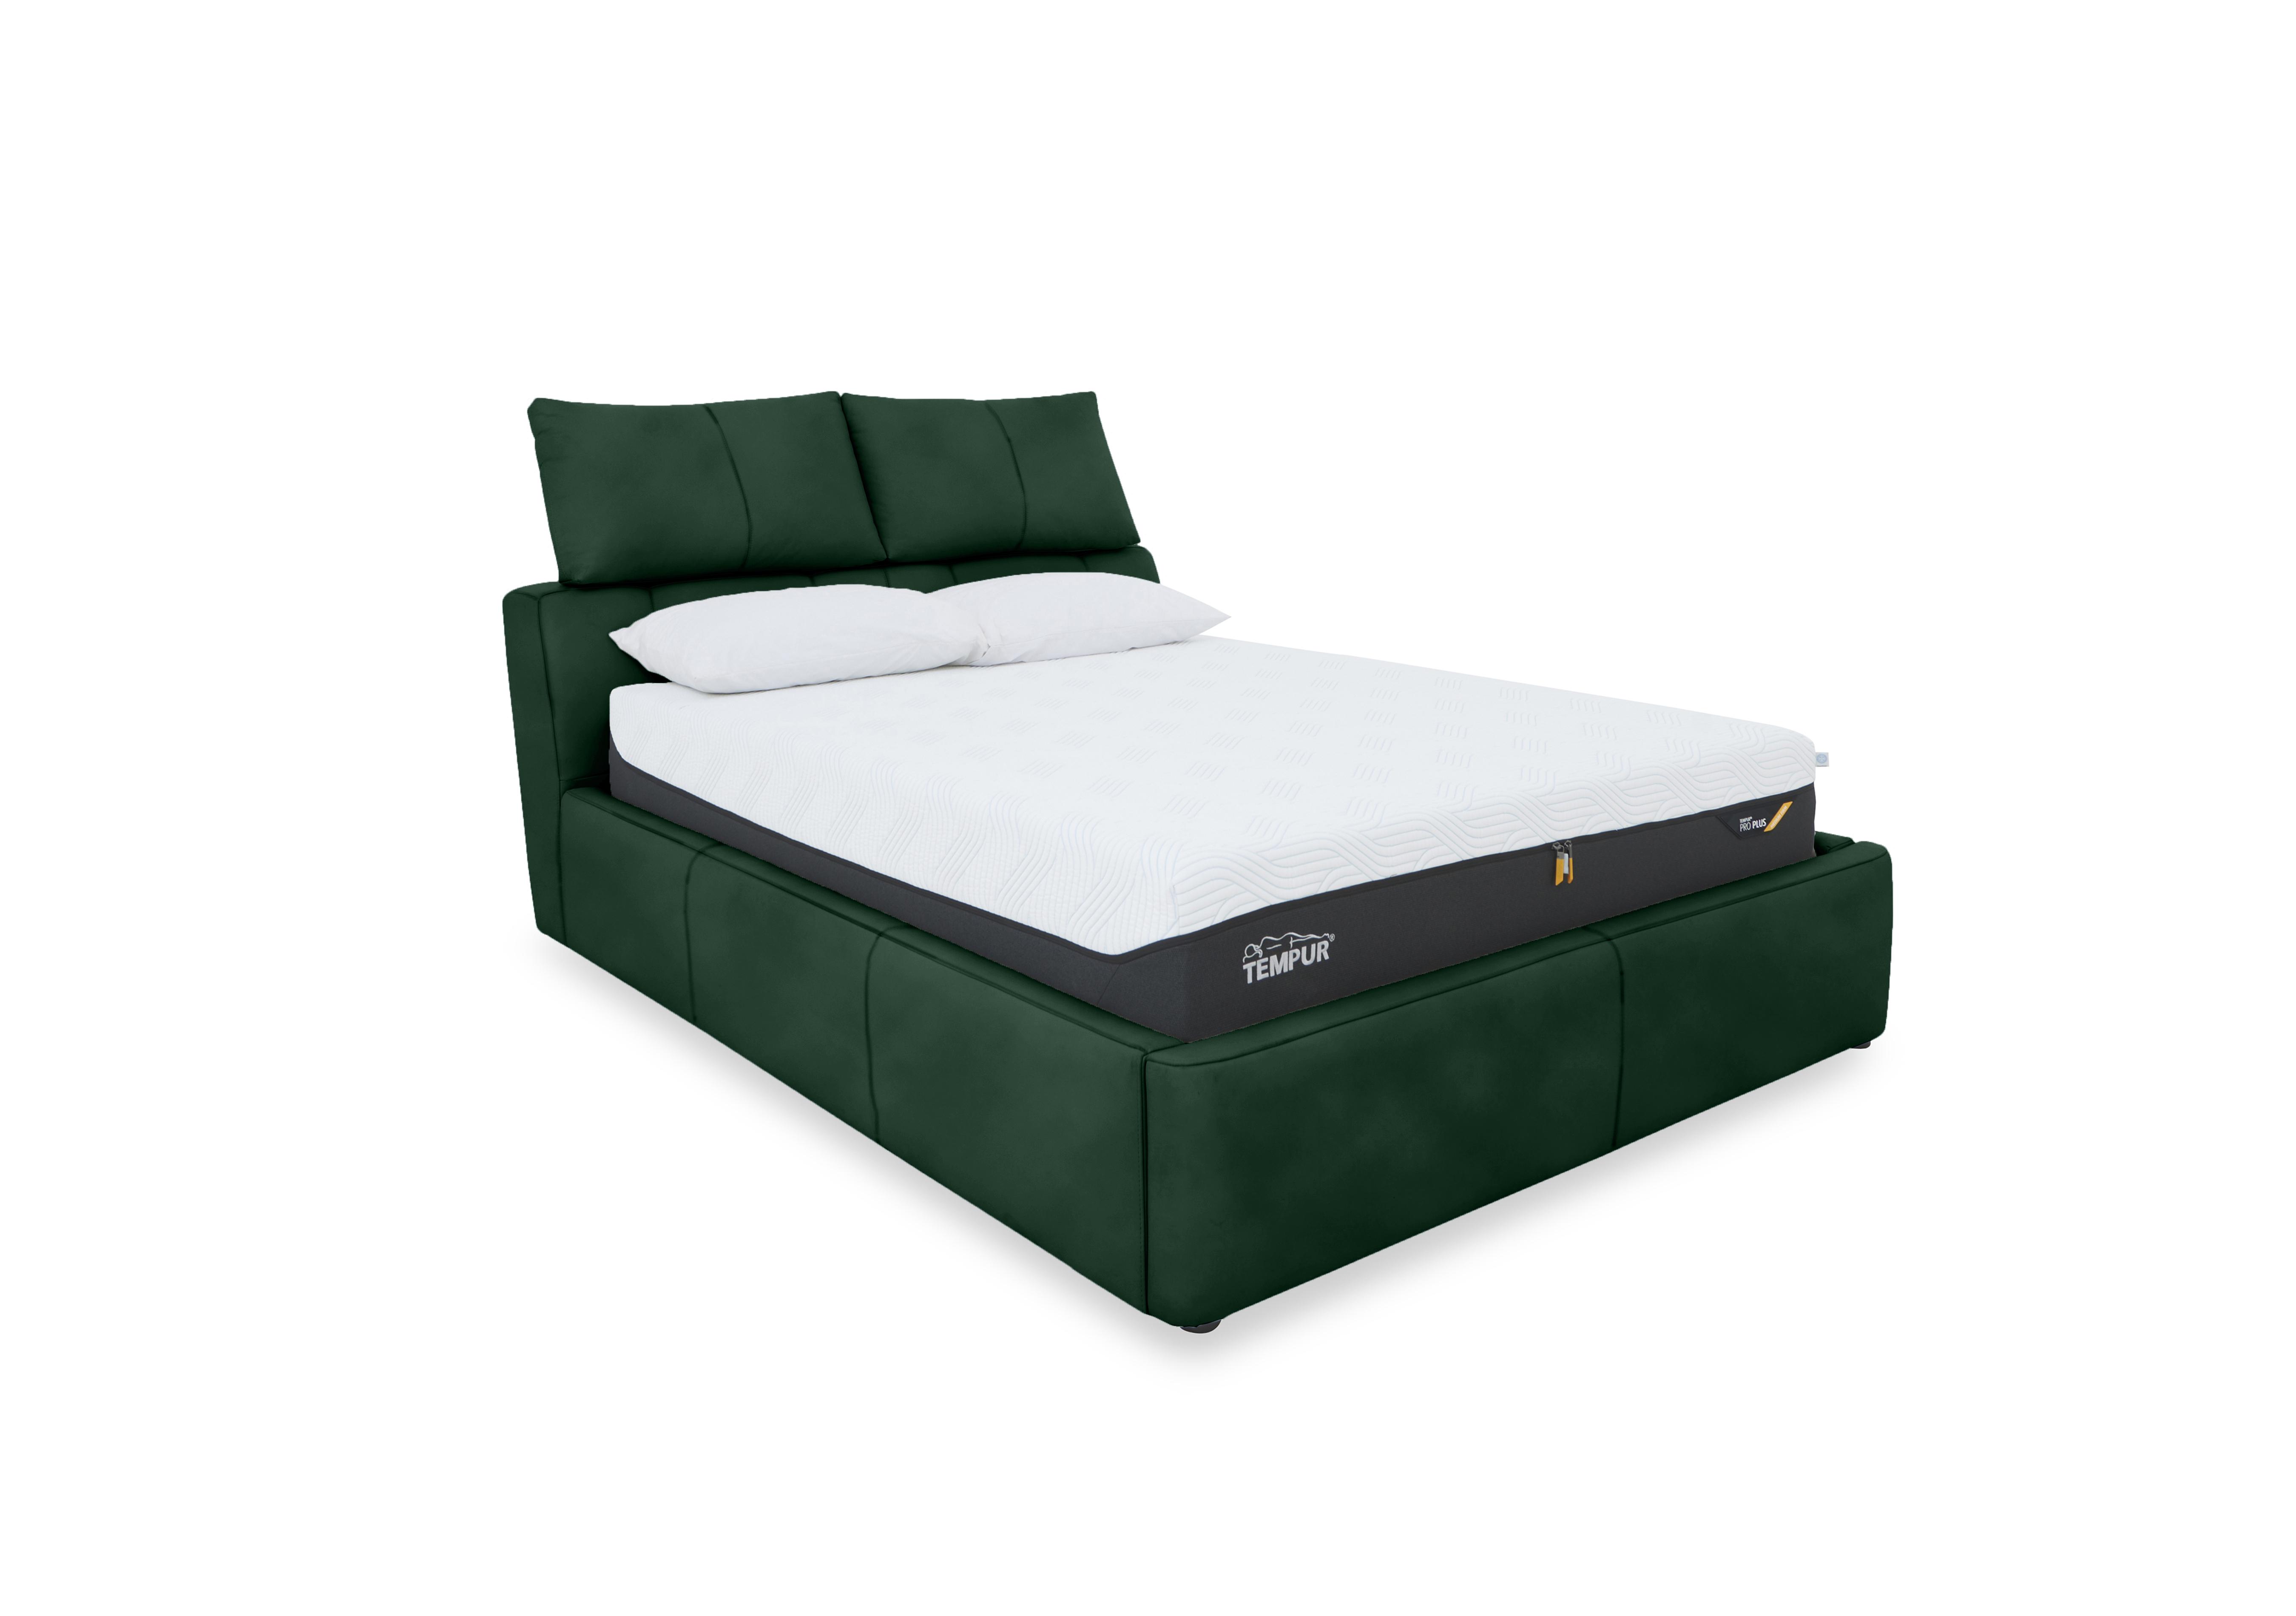 Tyrell Fabric Manual Ottoman Bed Frame in Fab-Meg-R37 Emerald Green on Furniture Village